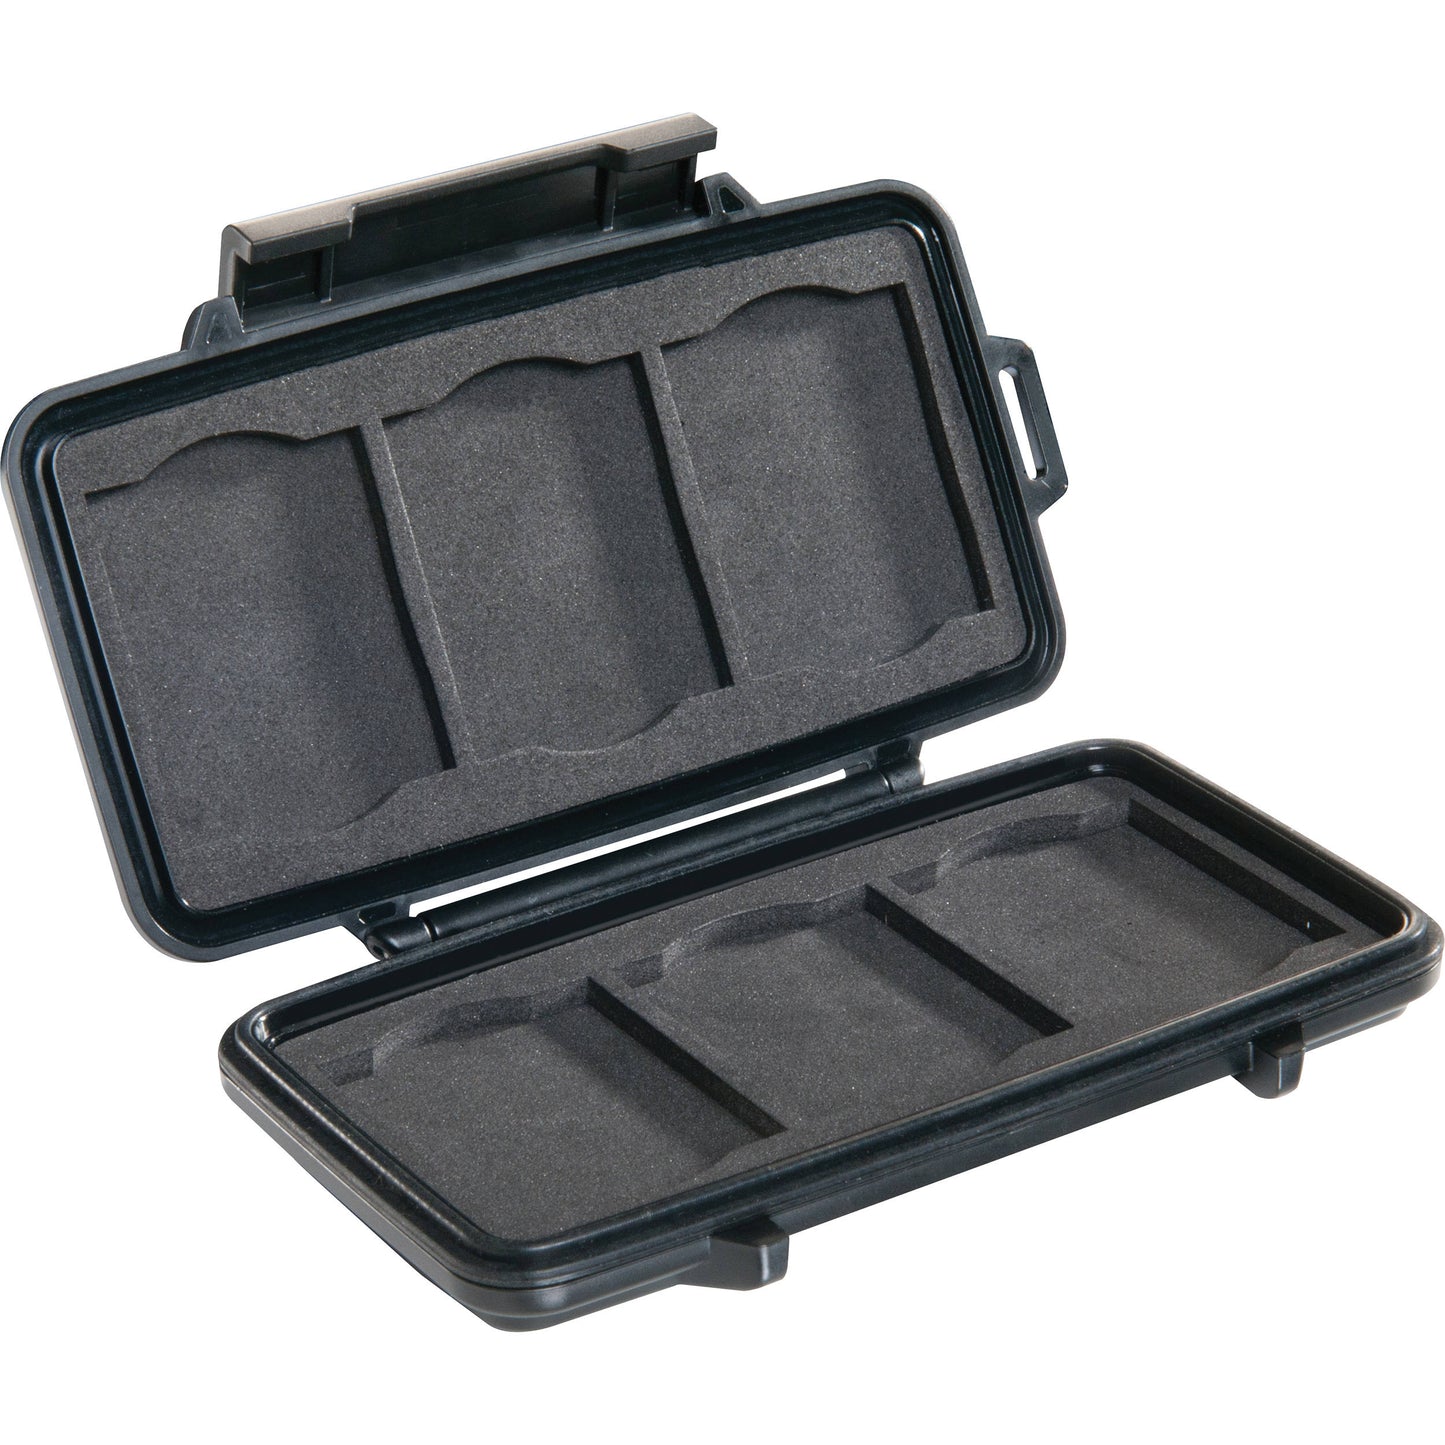 Pelican 0945 Memory Card Case Waterproof Crushproof Dustproof Hard Casing with Removable Liner (Fits 6 Flash Cards)